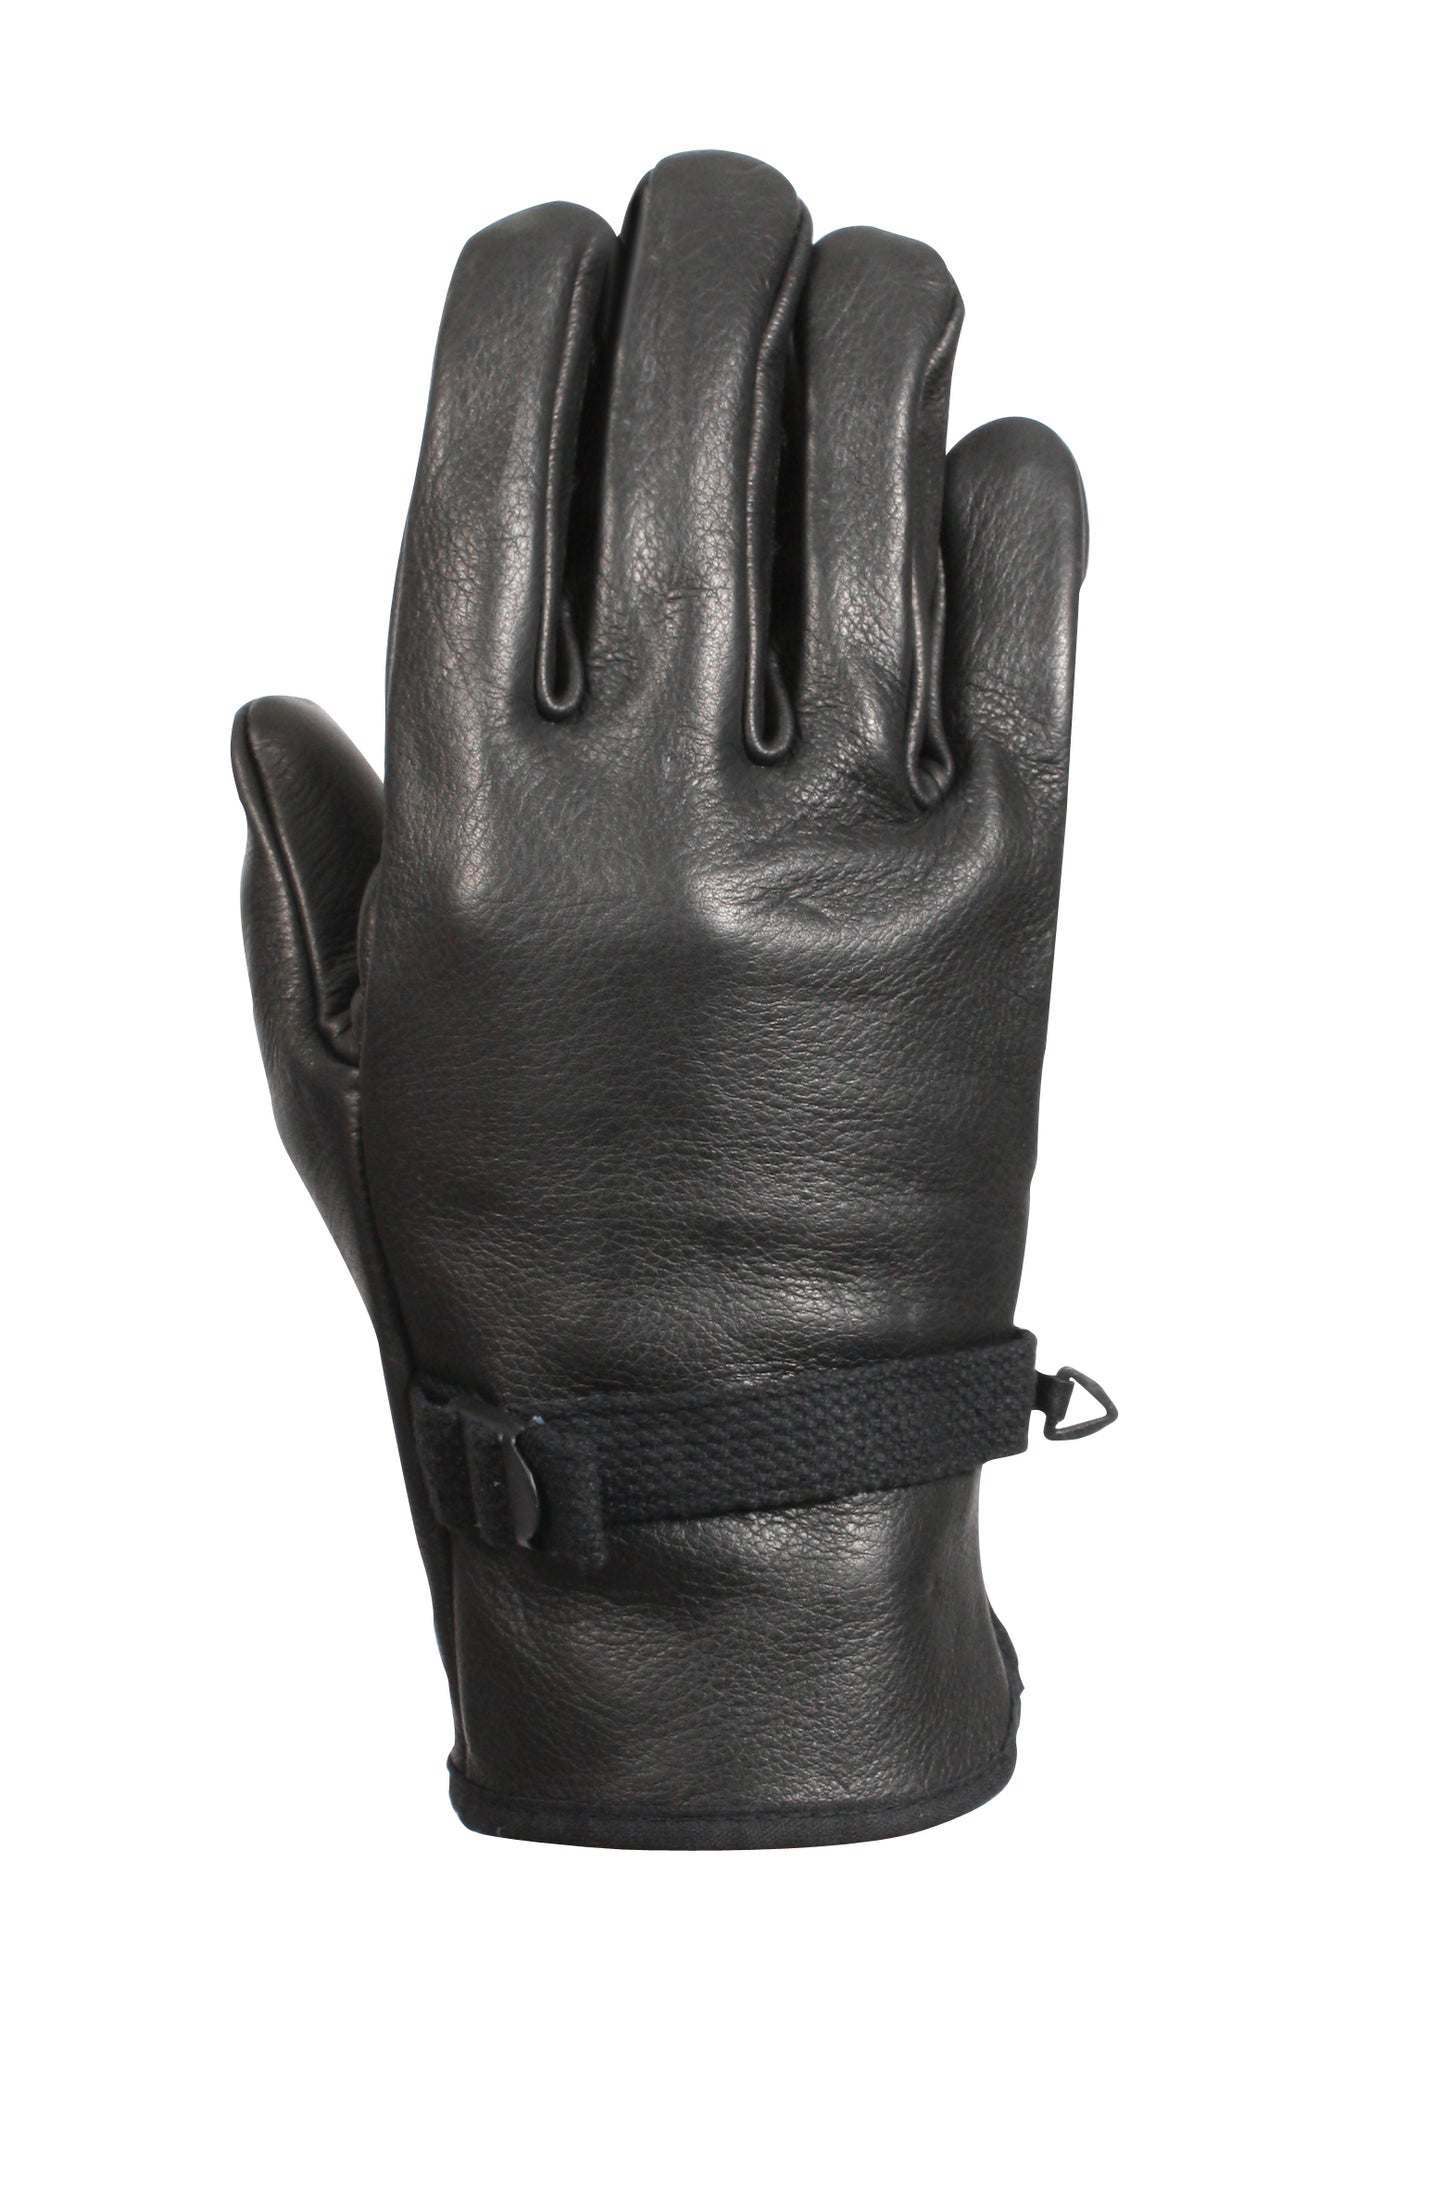 Rothco D3-A Type Leather Gloves